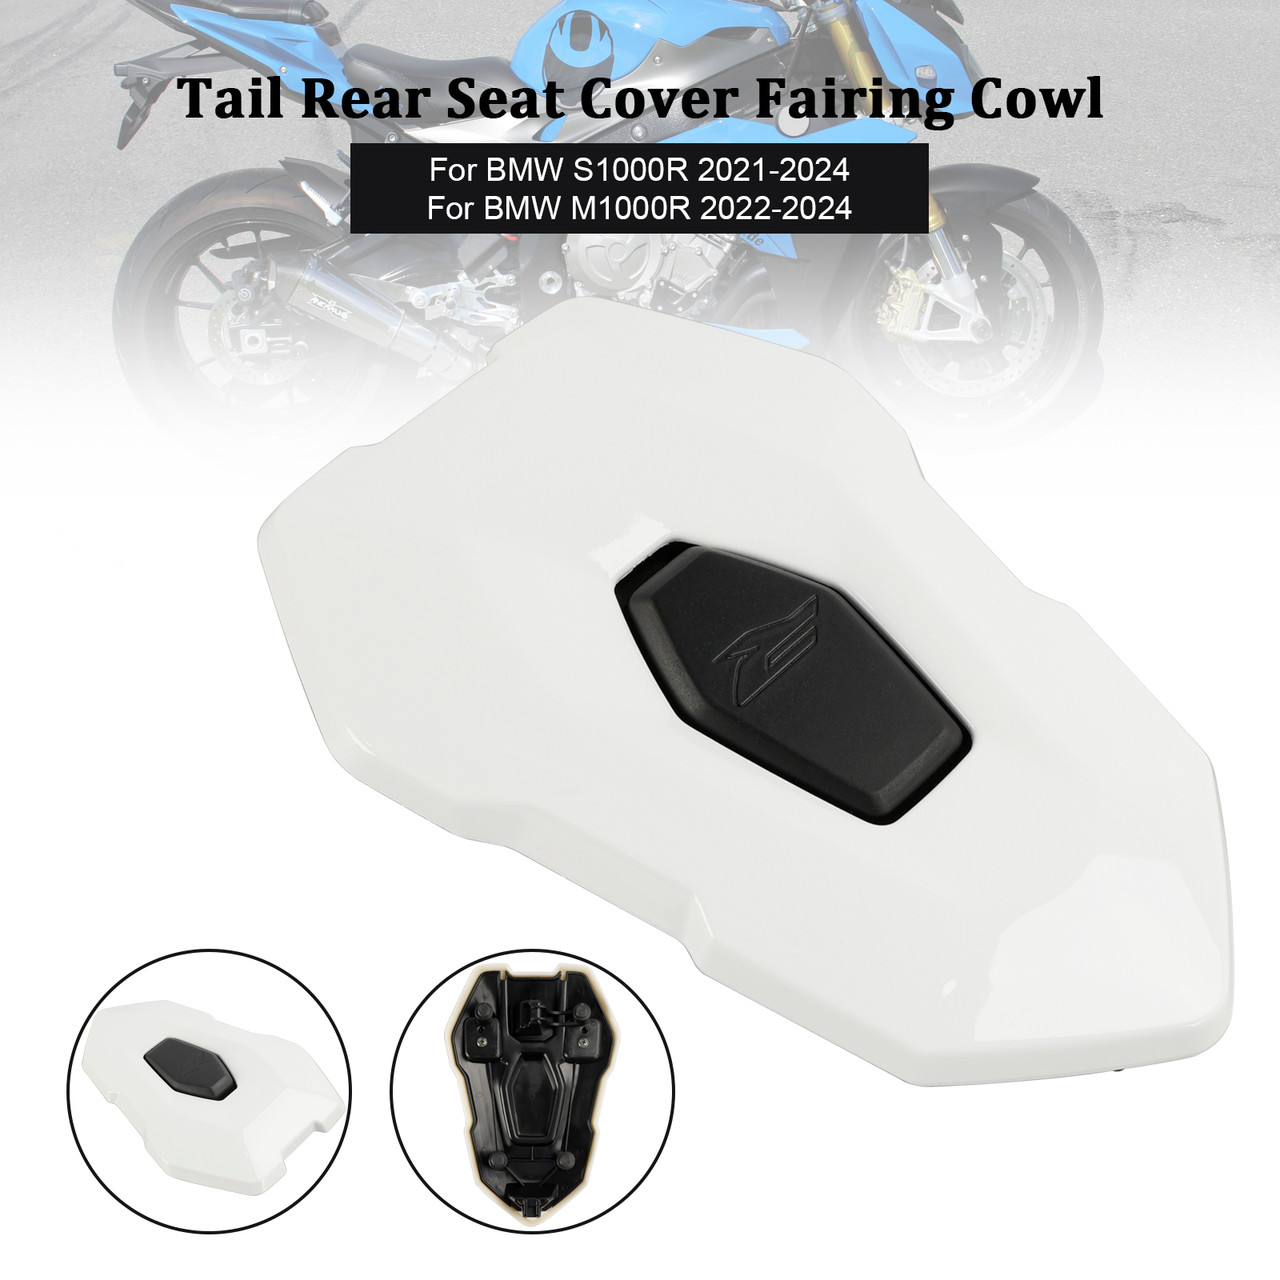 2021-2024 BMW S1000R Tail Rear Seat Cover Fairing Cowl white Generic